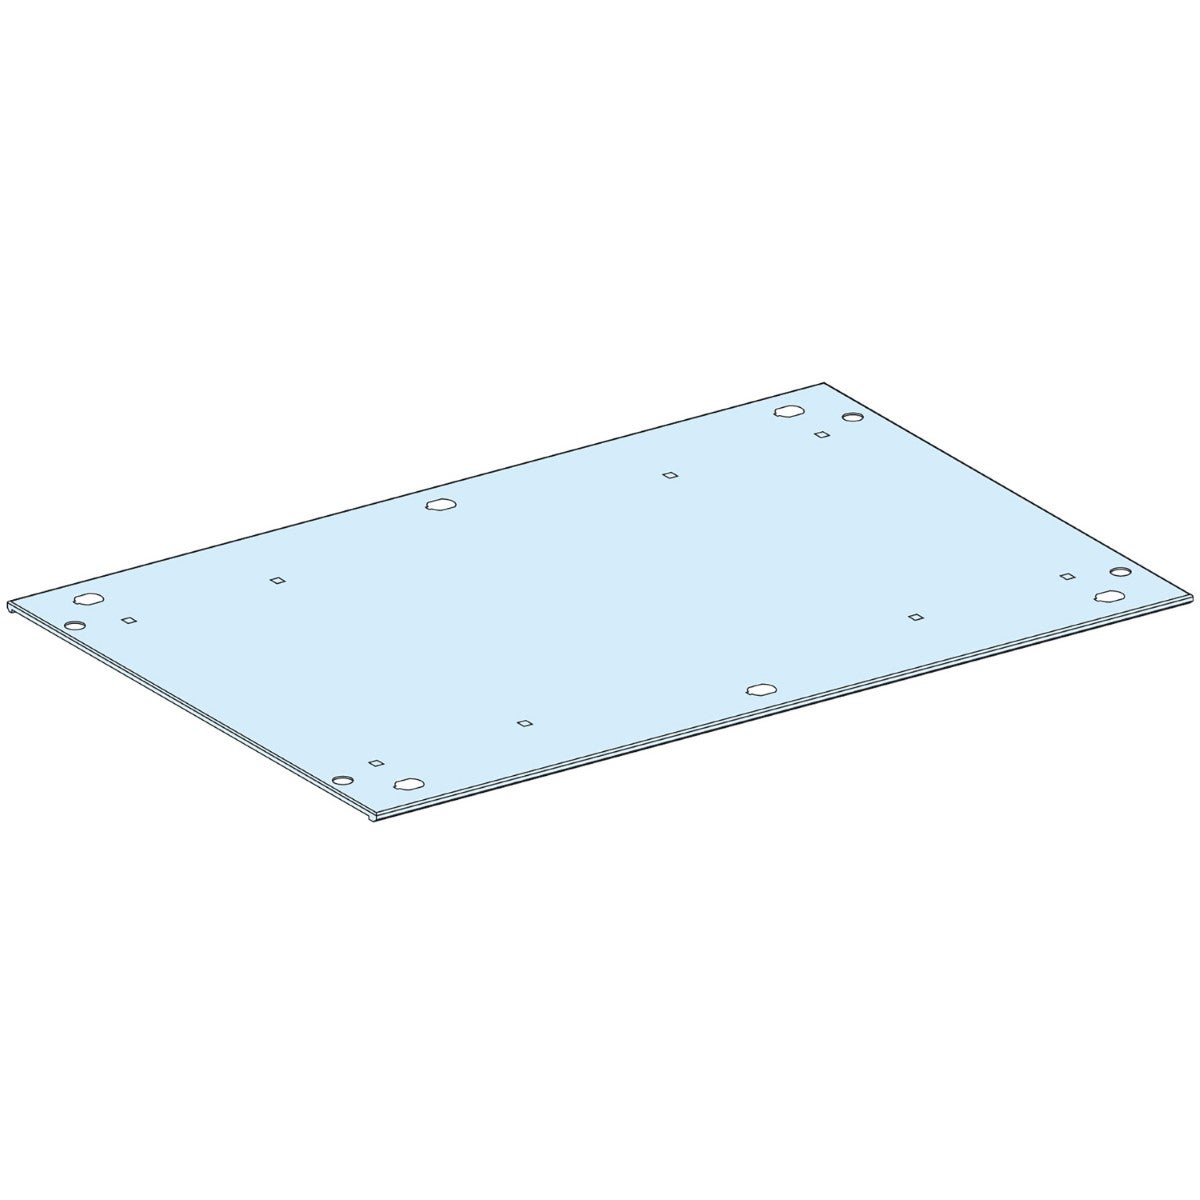 Roof plate, PrismaSeT P, for enclosure, W800mm, D400mm, IP30, white, RAL 9003